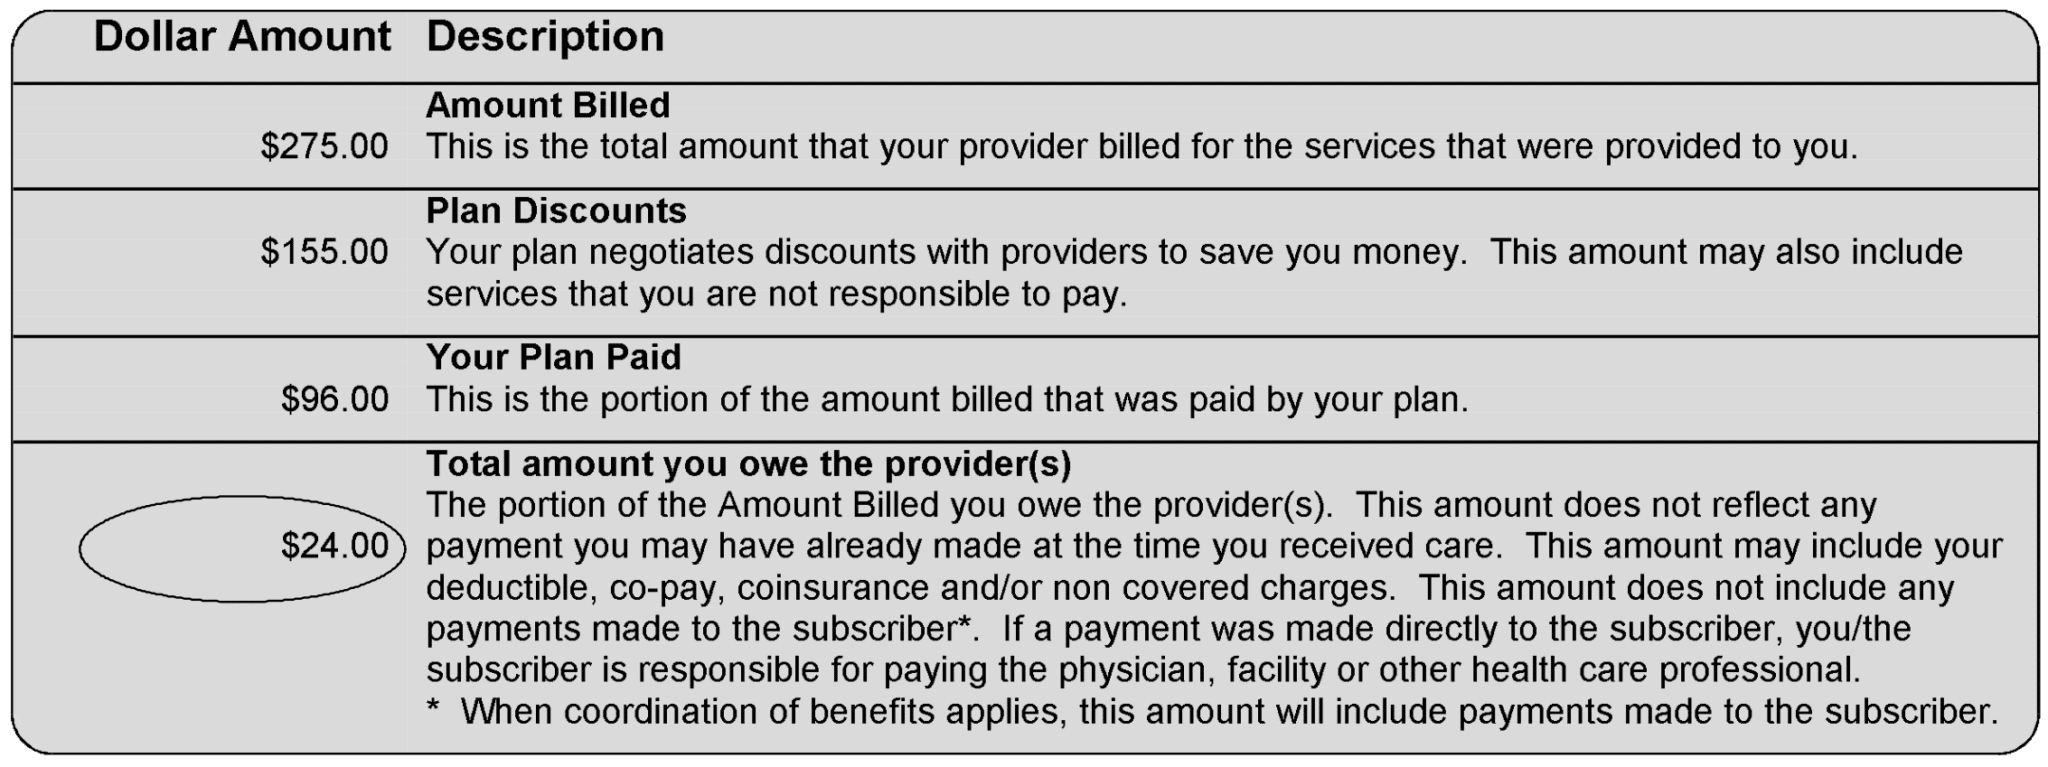 The Ultimate Guide To Disputing A Medical Bill To Reduce Your Payment